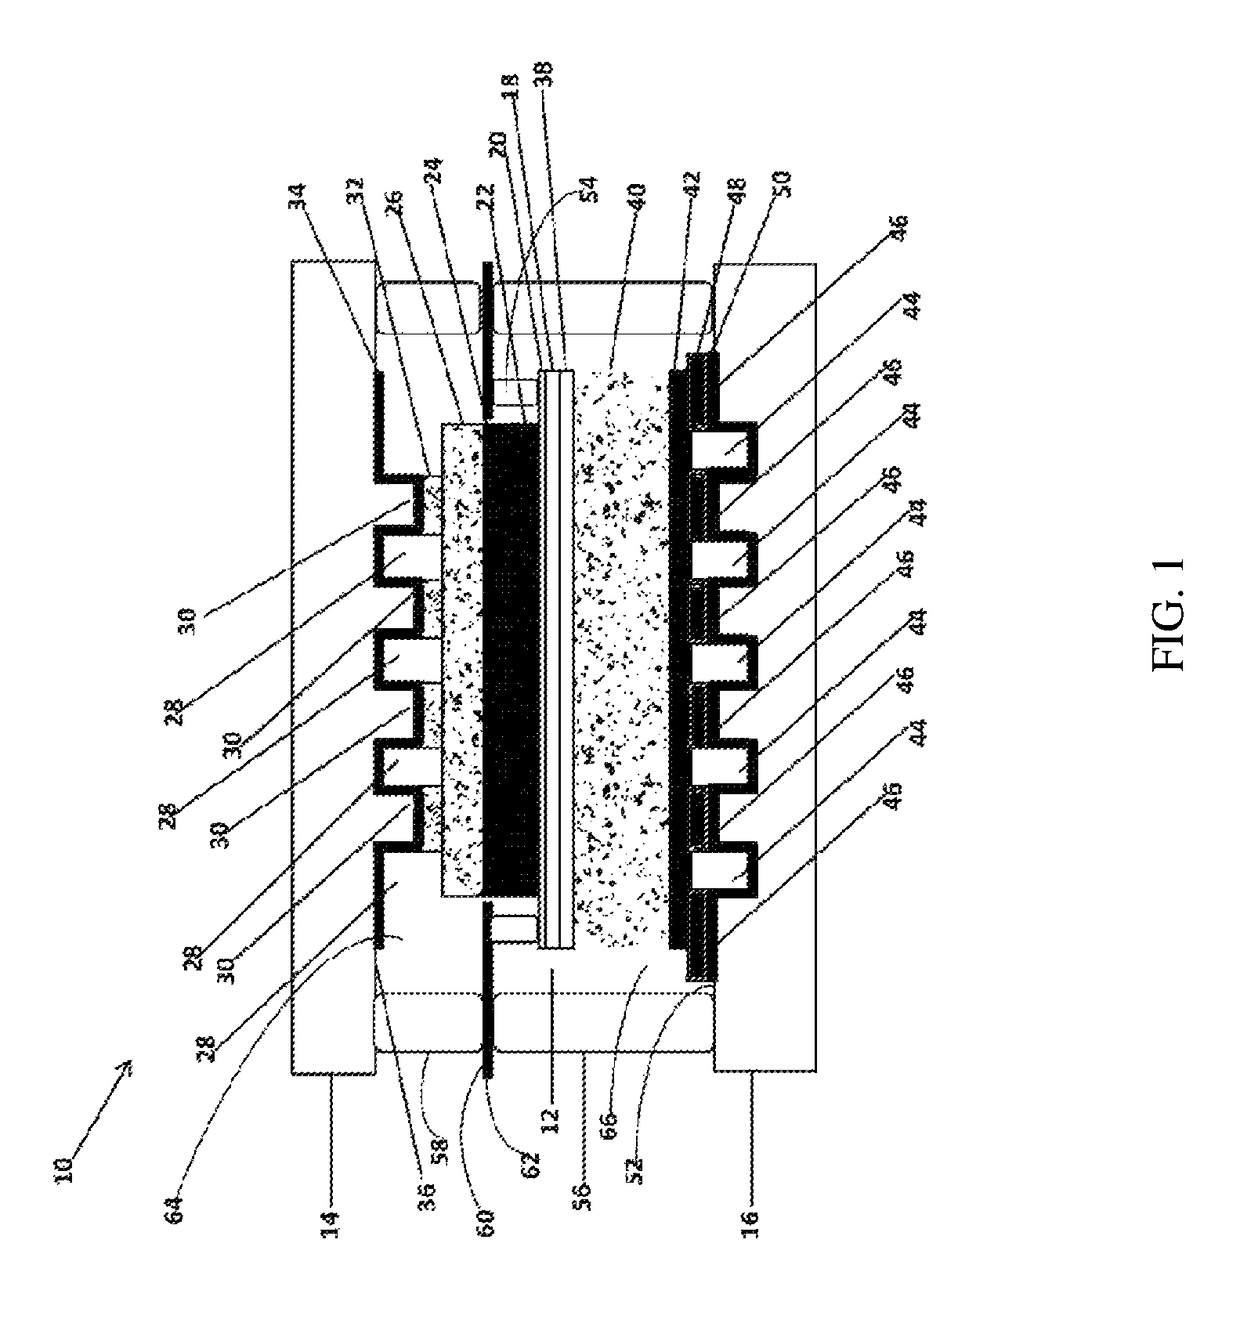 Electrochemical energy conversion devices and cells, and positive electrode-side materials for them